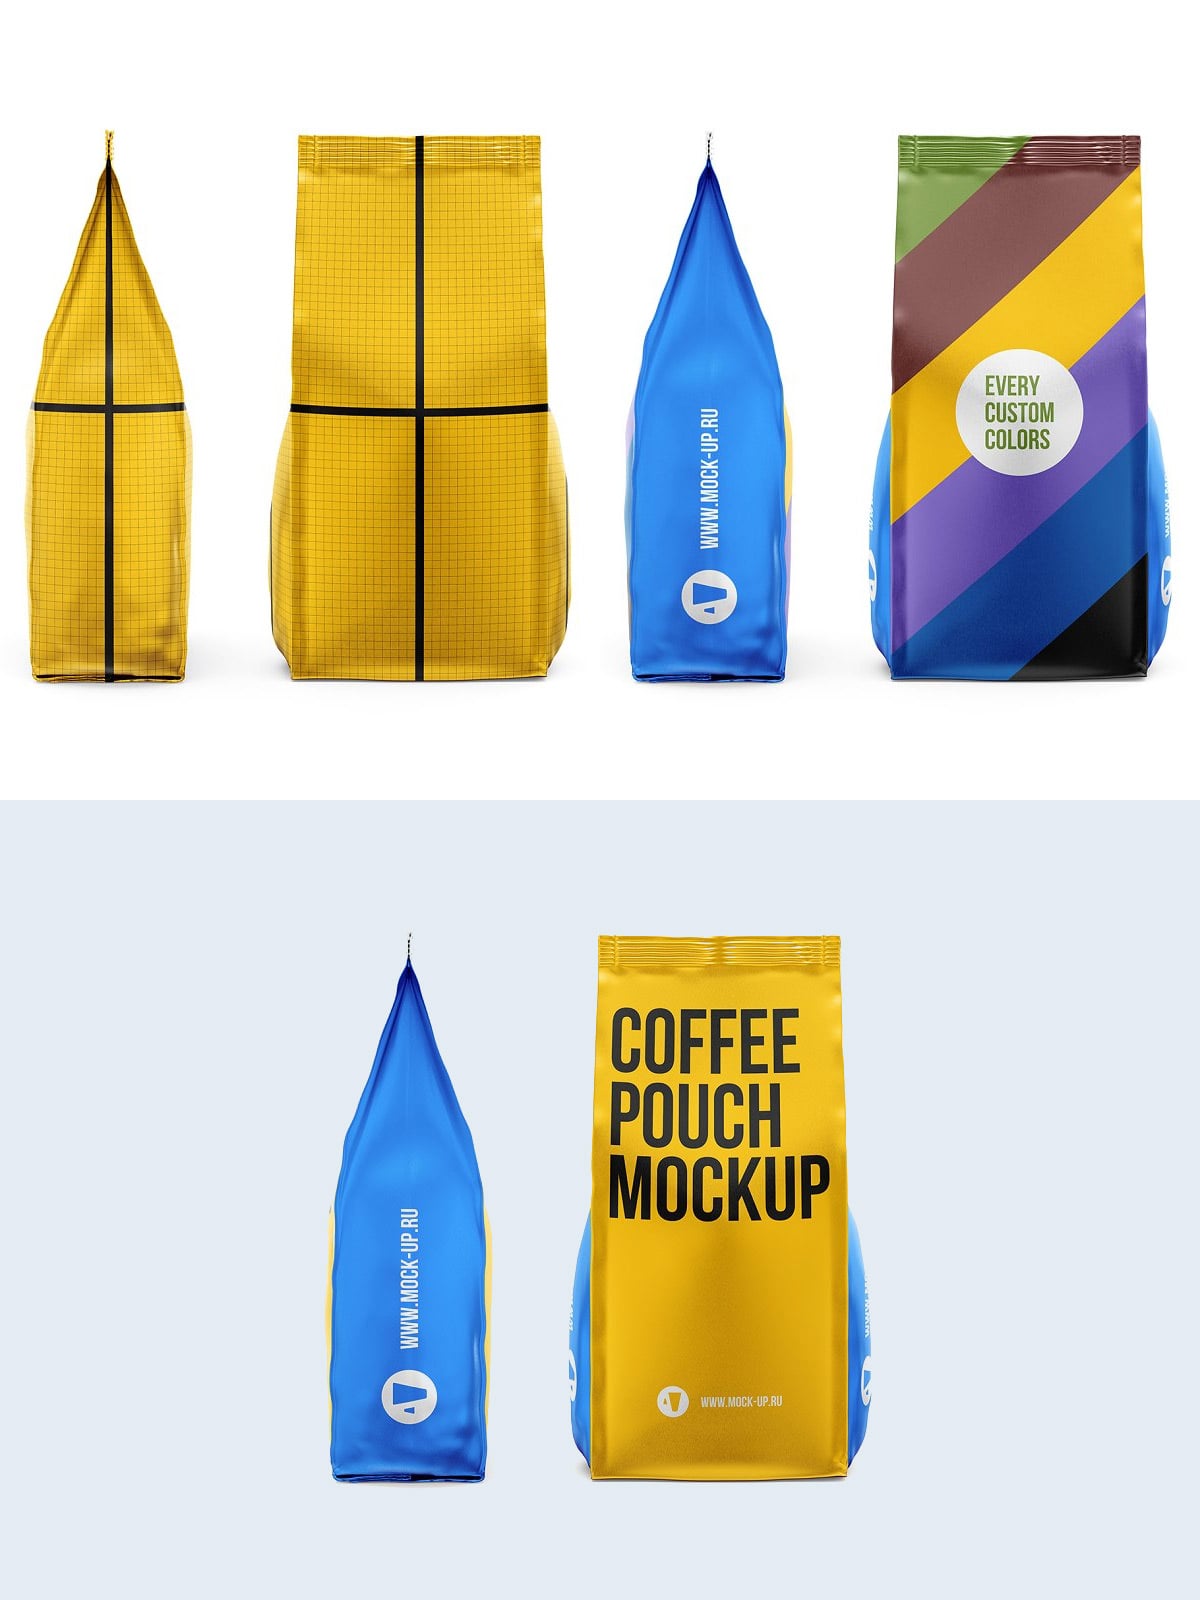 Coffee Pouch Mockup Front and side views